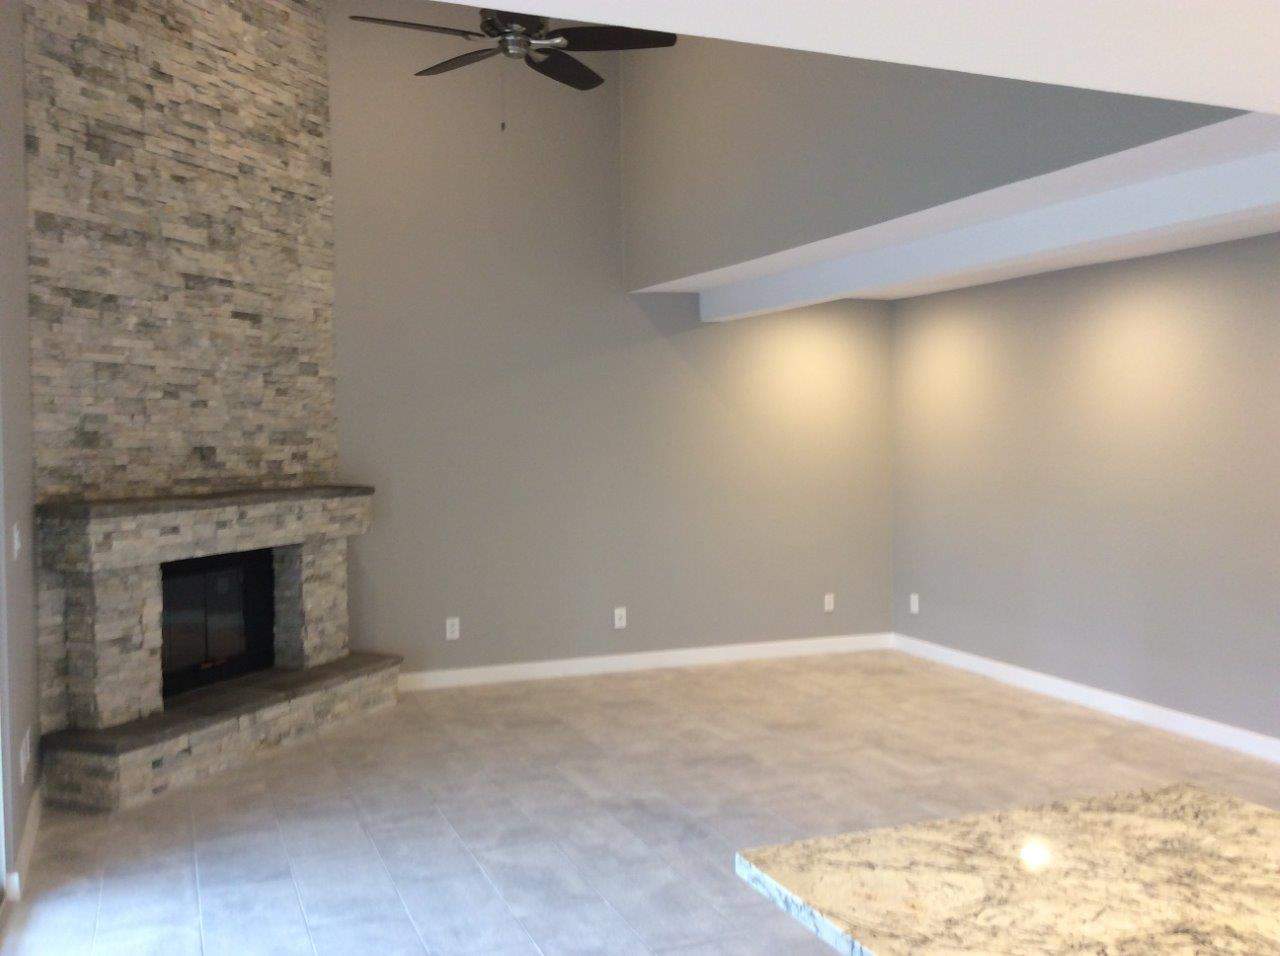 Residential house with fireplace and new paint job